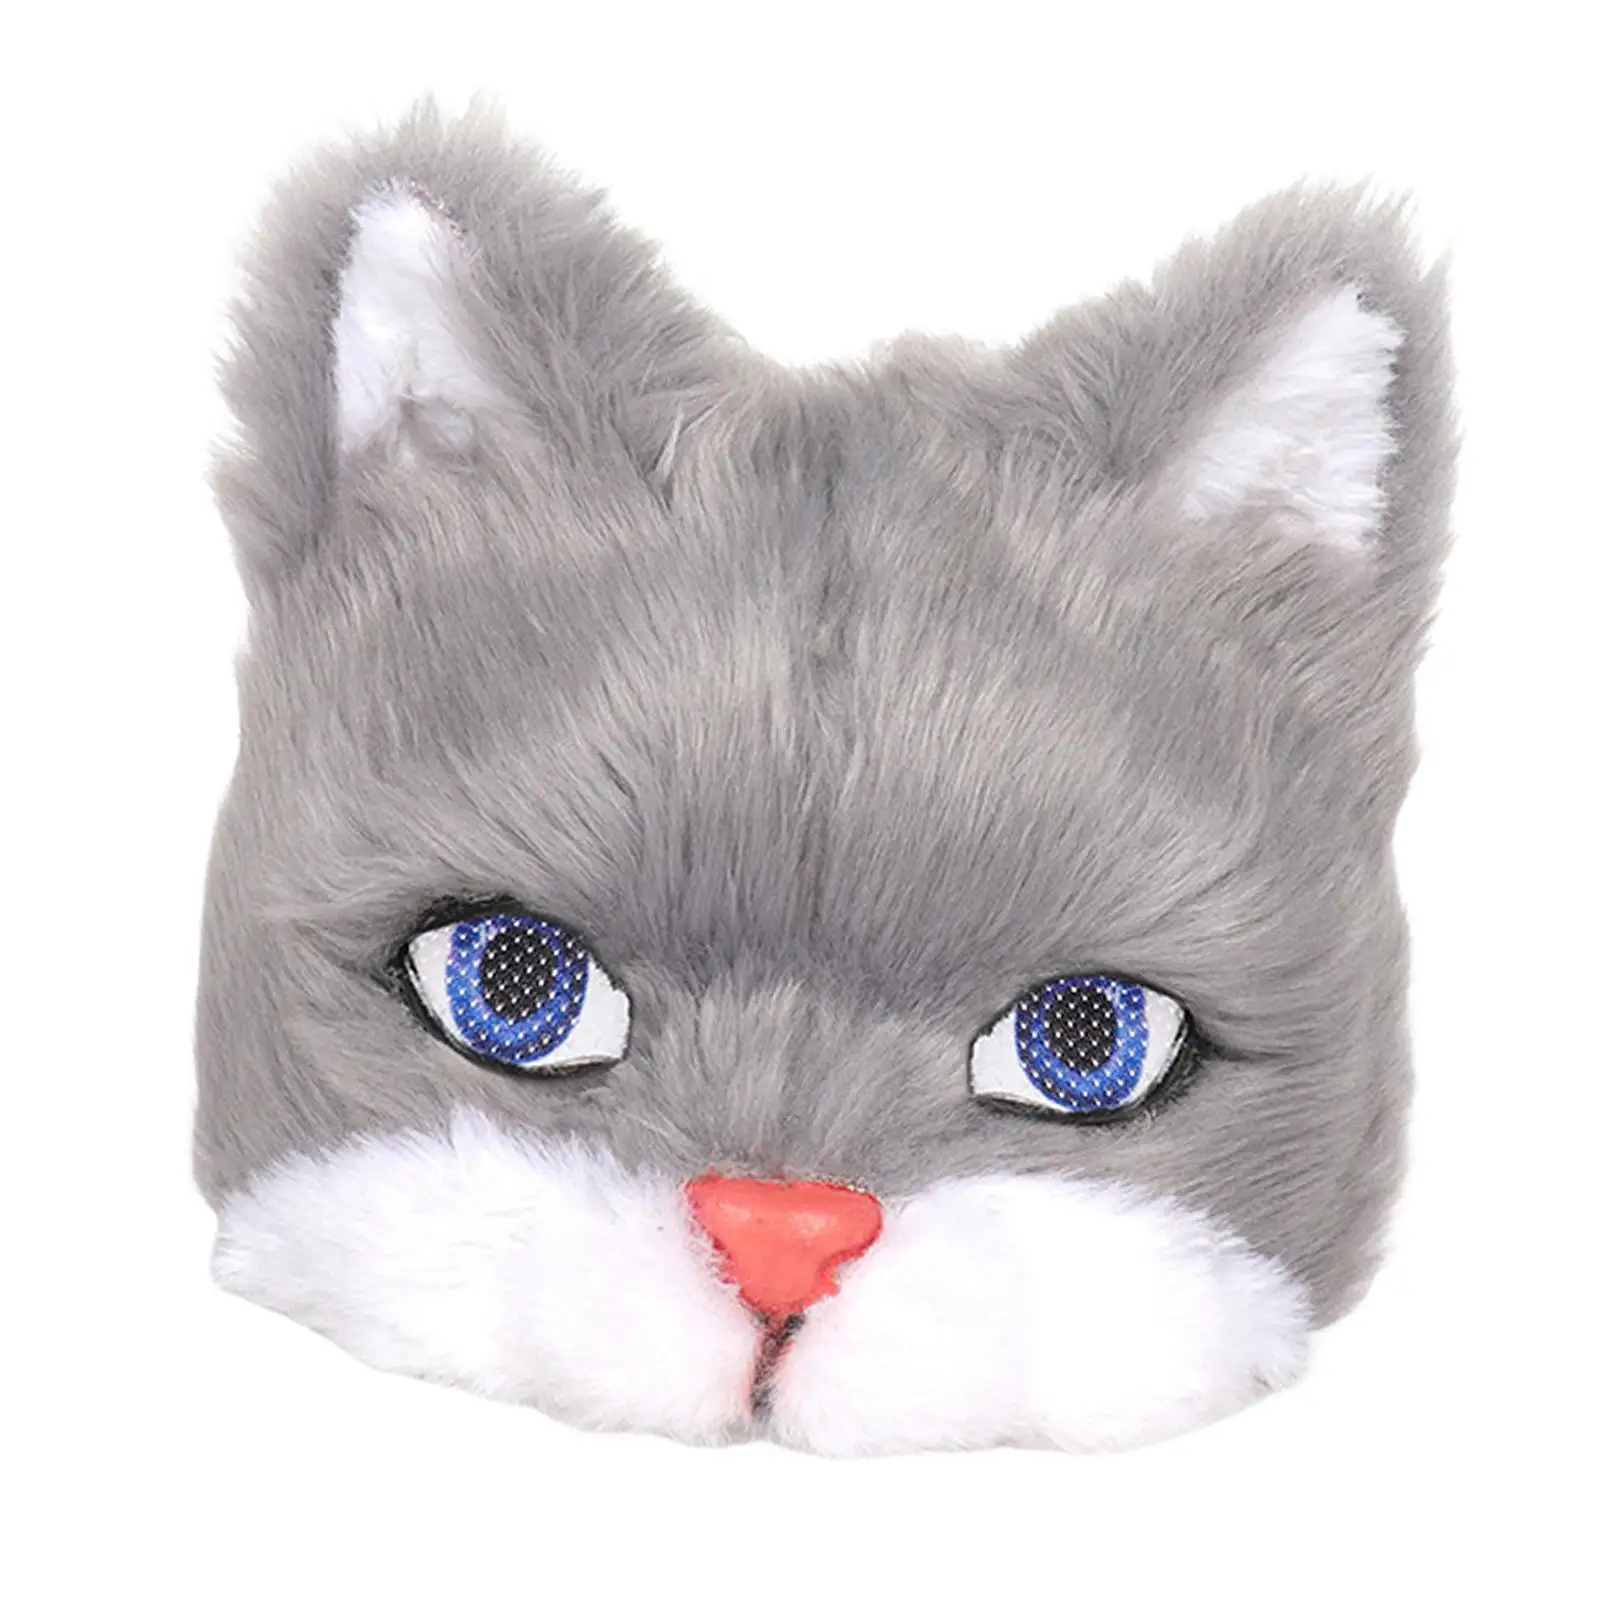 Novelty Plush Cat Mask Female Half Face for Kids Adults Eye Mask for Masquerade Role Play Photo Prop Cosplay Accessories Costume